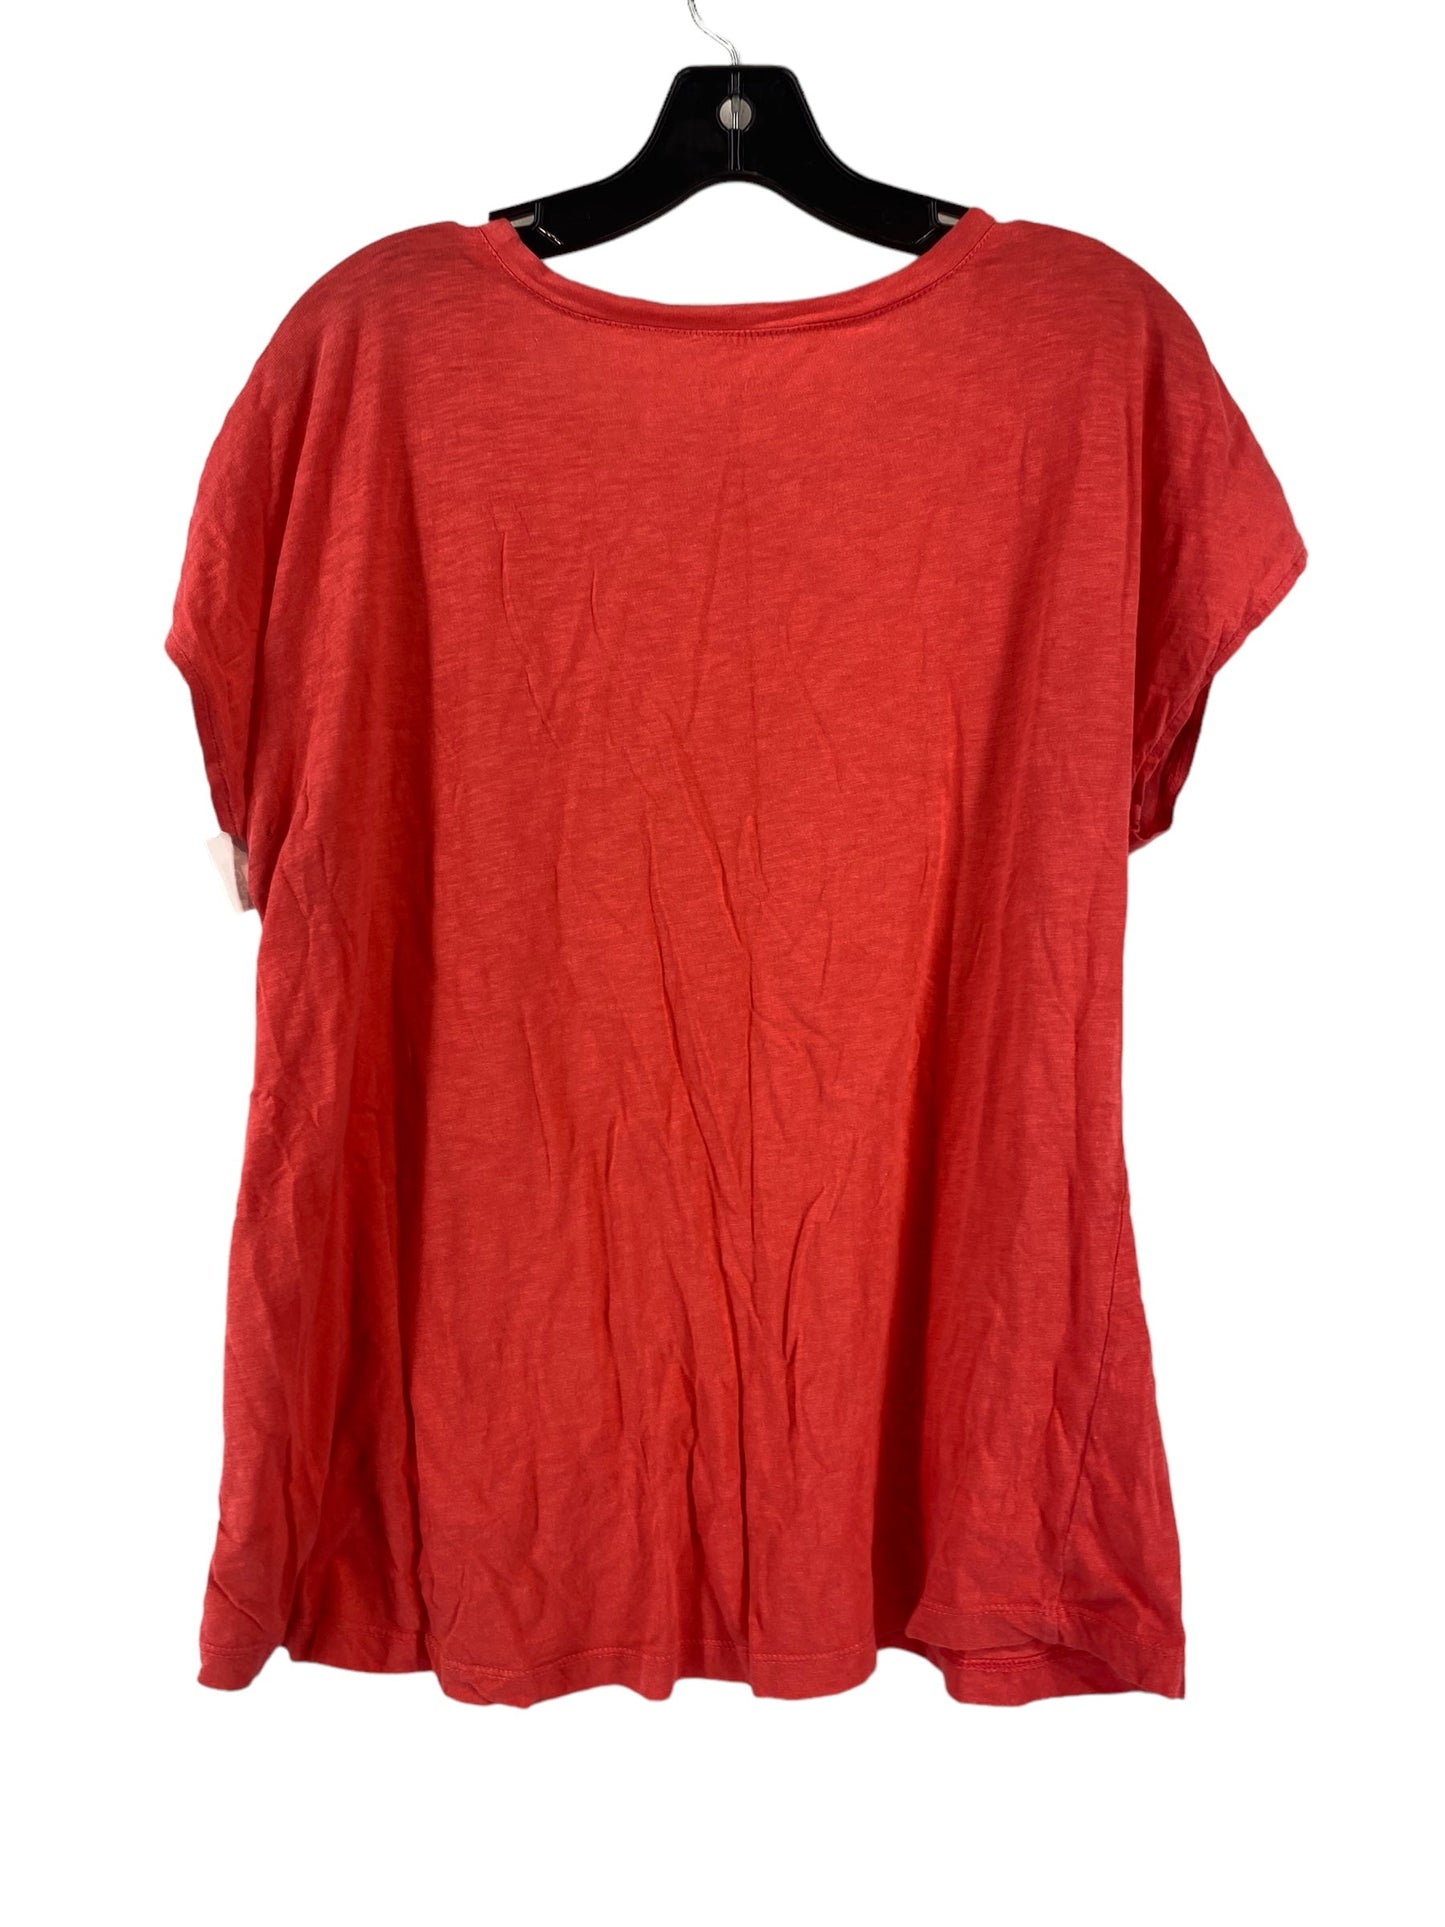 Red Top Short Sleeve Basic Gh Bass And Co, Size L